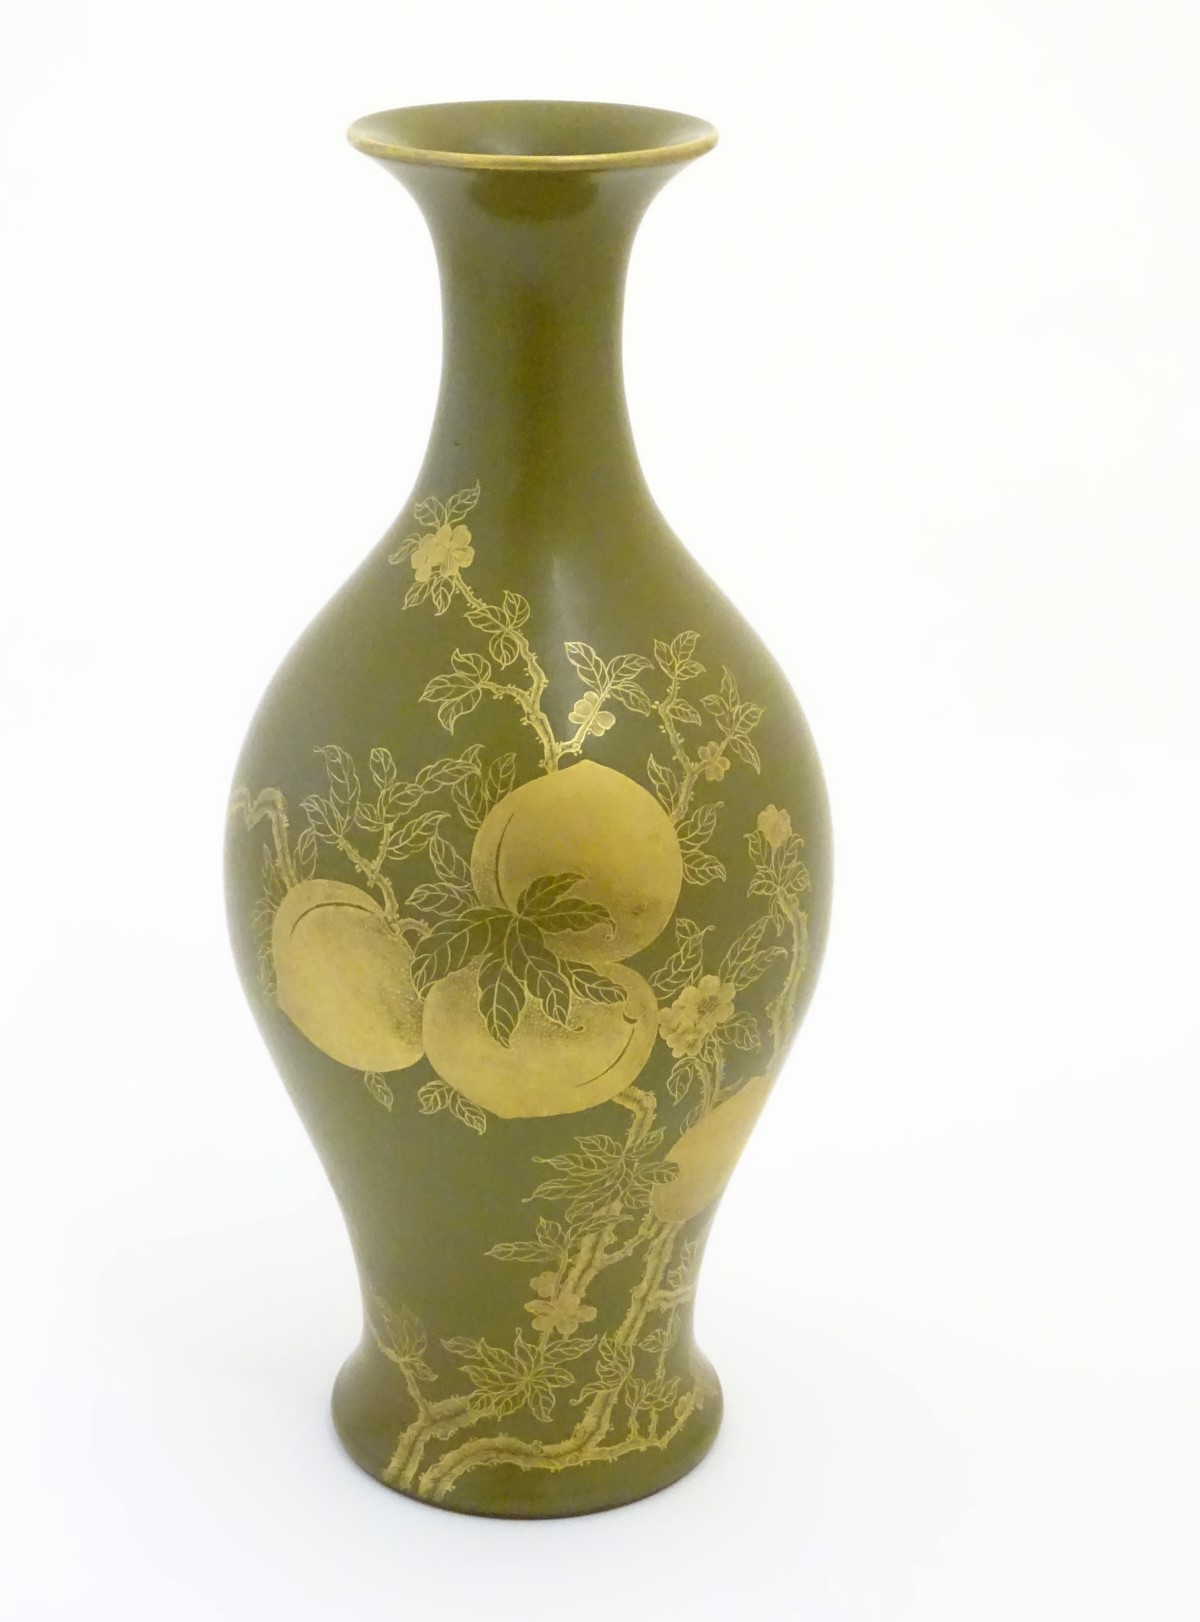 A Chinese tea dust glaze vase with gilt fruit, bat and branch decoration. Character marks under.